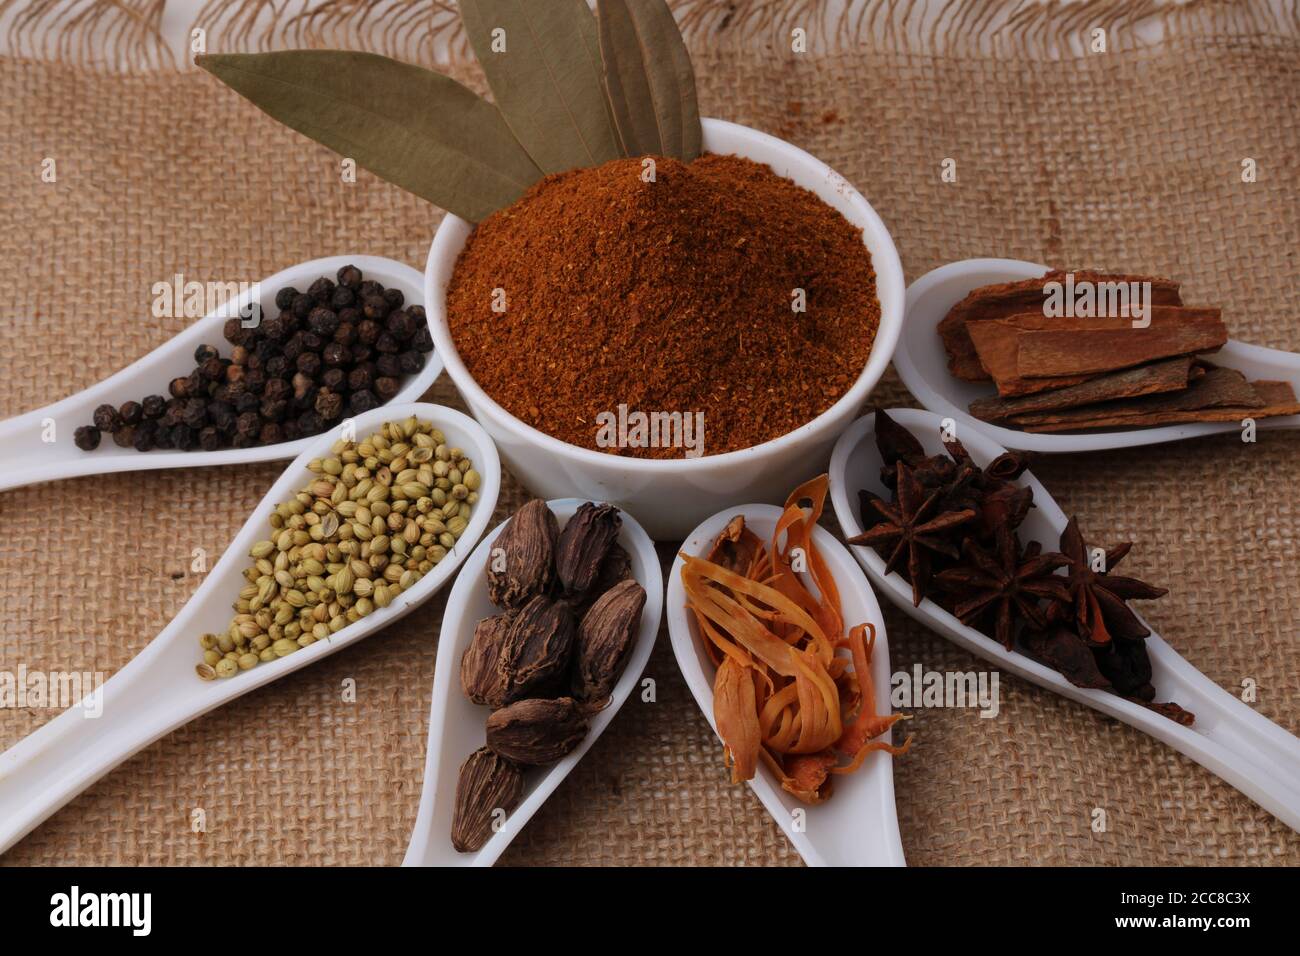 Indian Garam masala powder and colourful spices. Over burlup Stock Photo